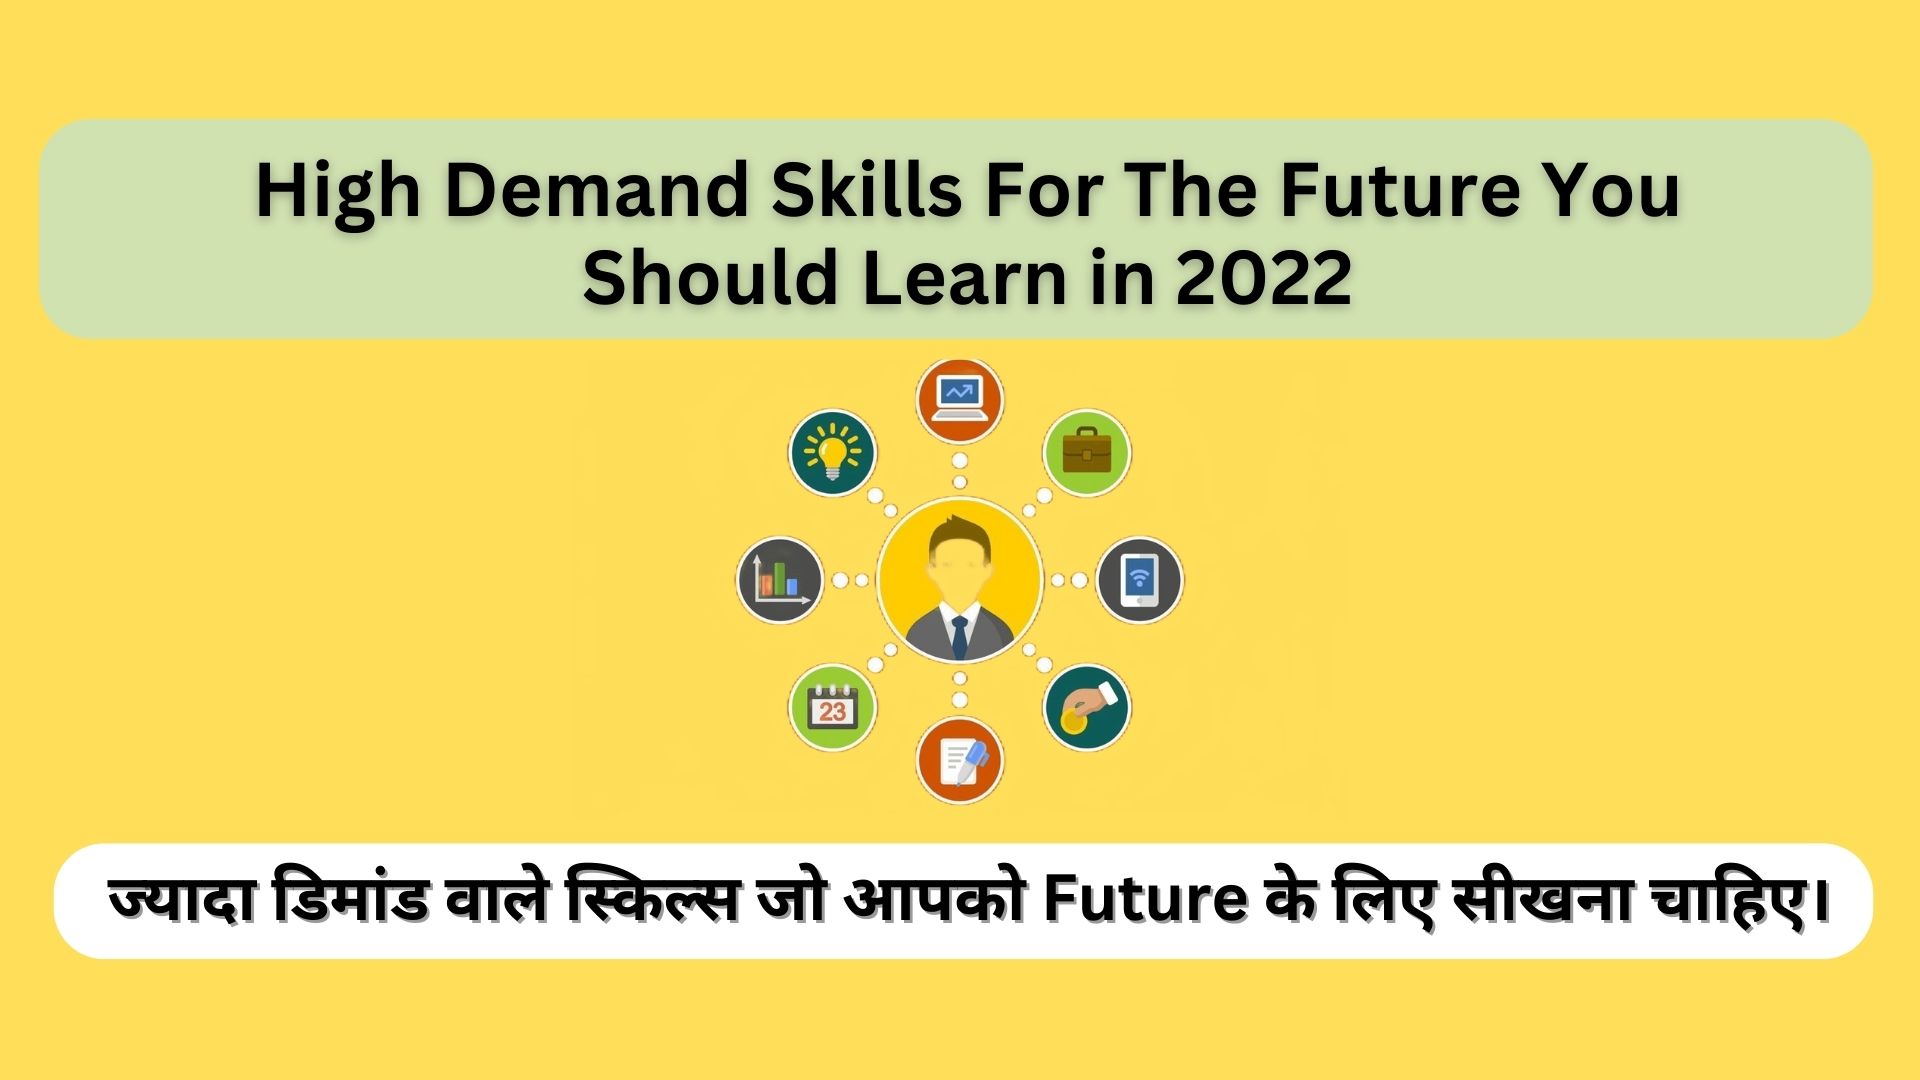 High Demand Skills For The Future You Should Learn in 2022